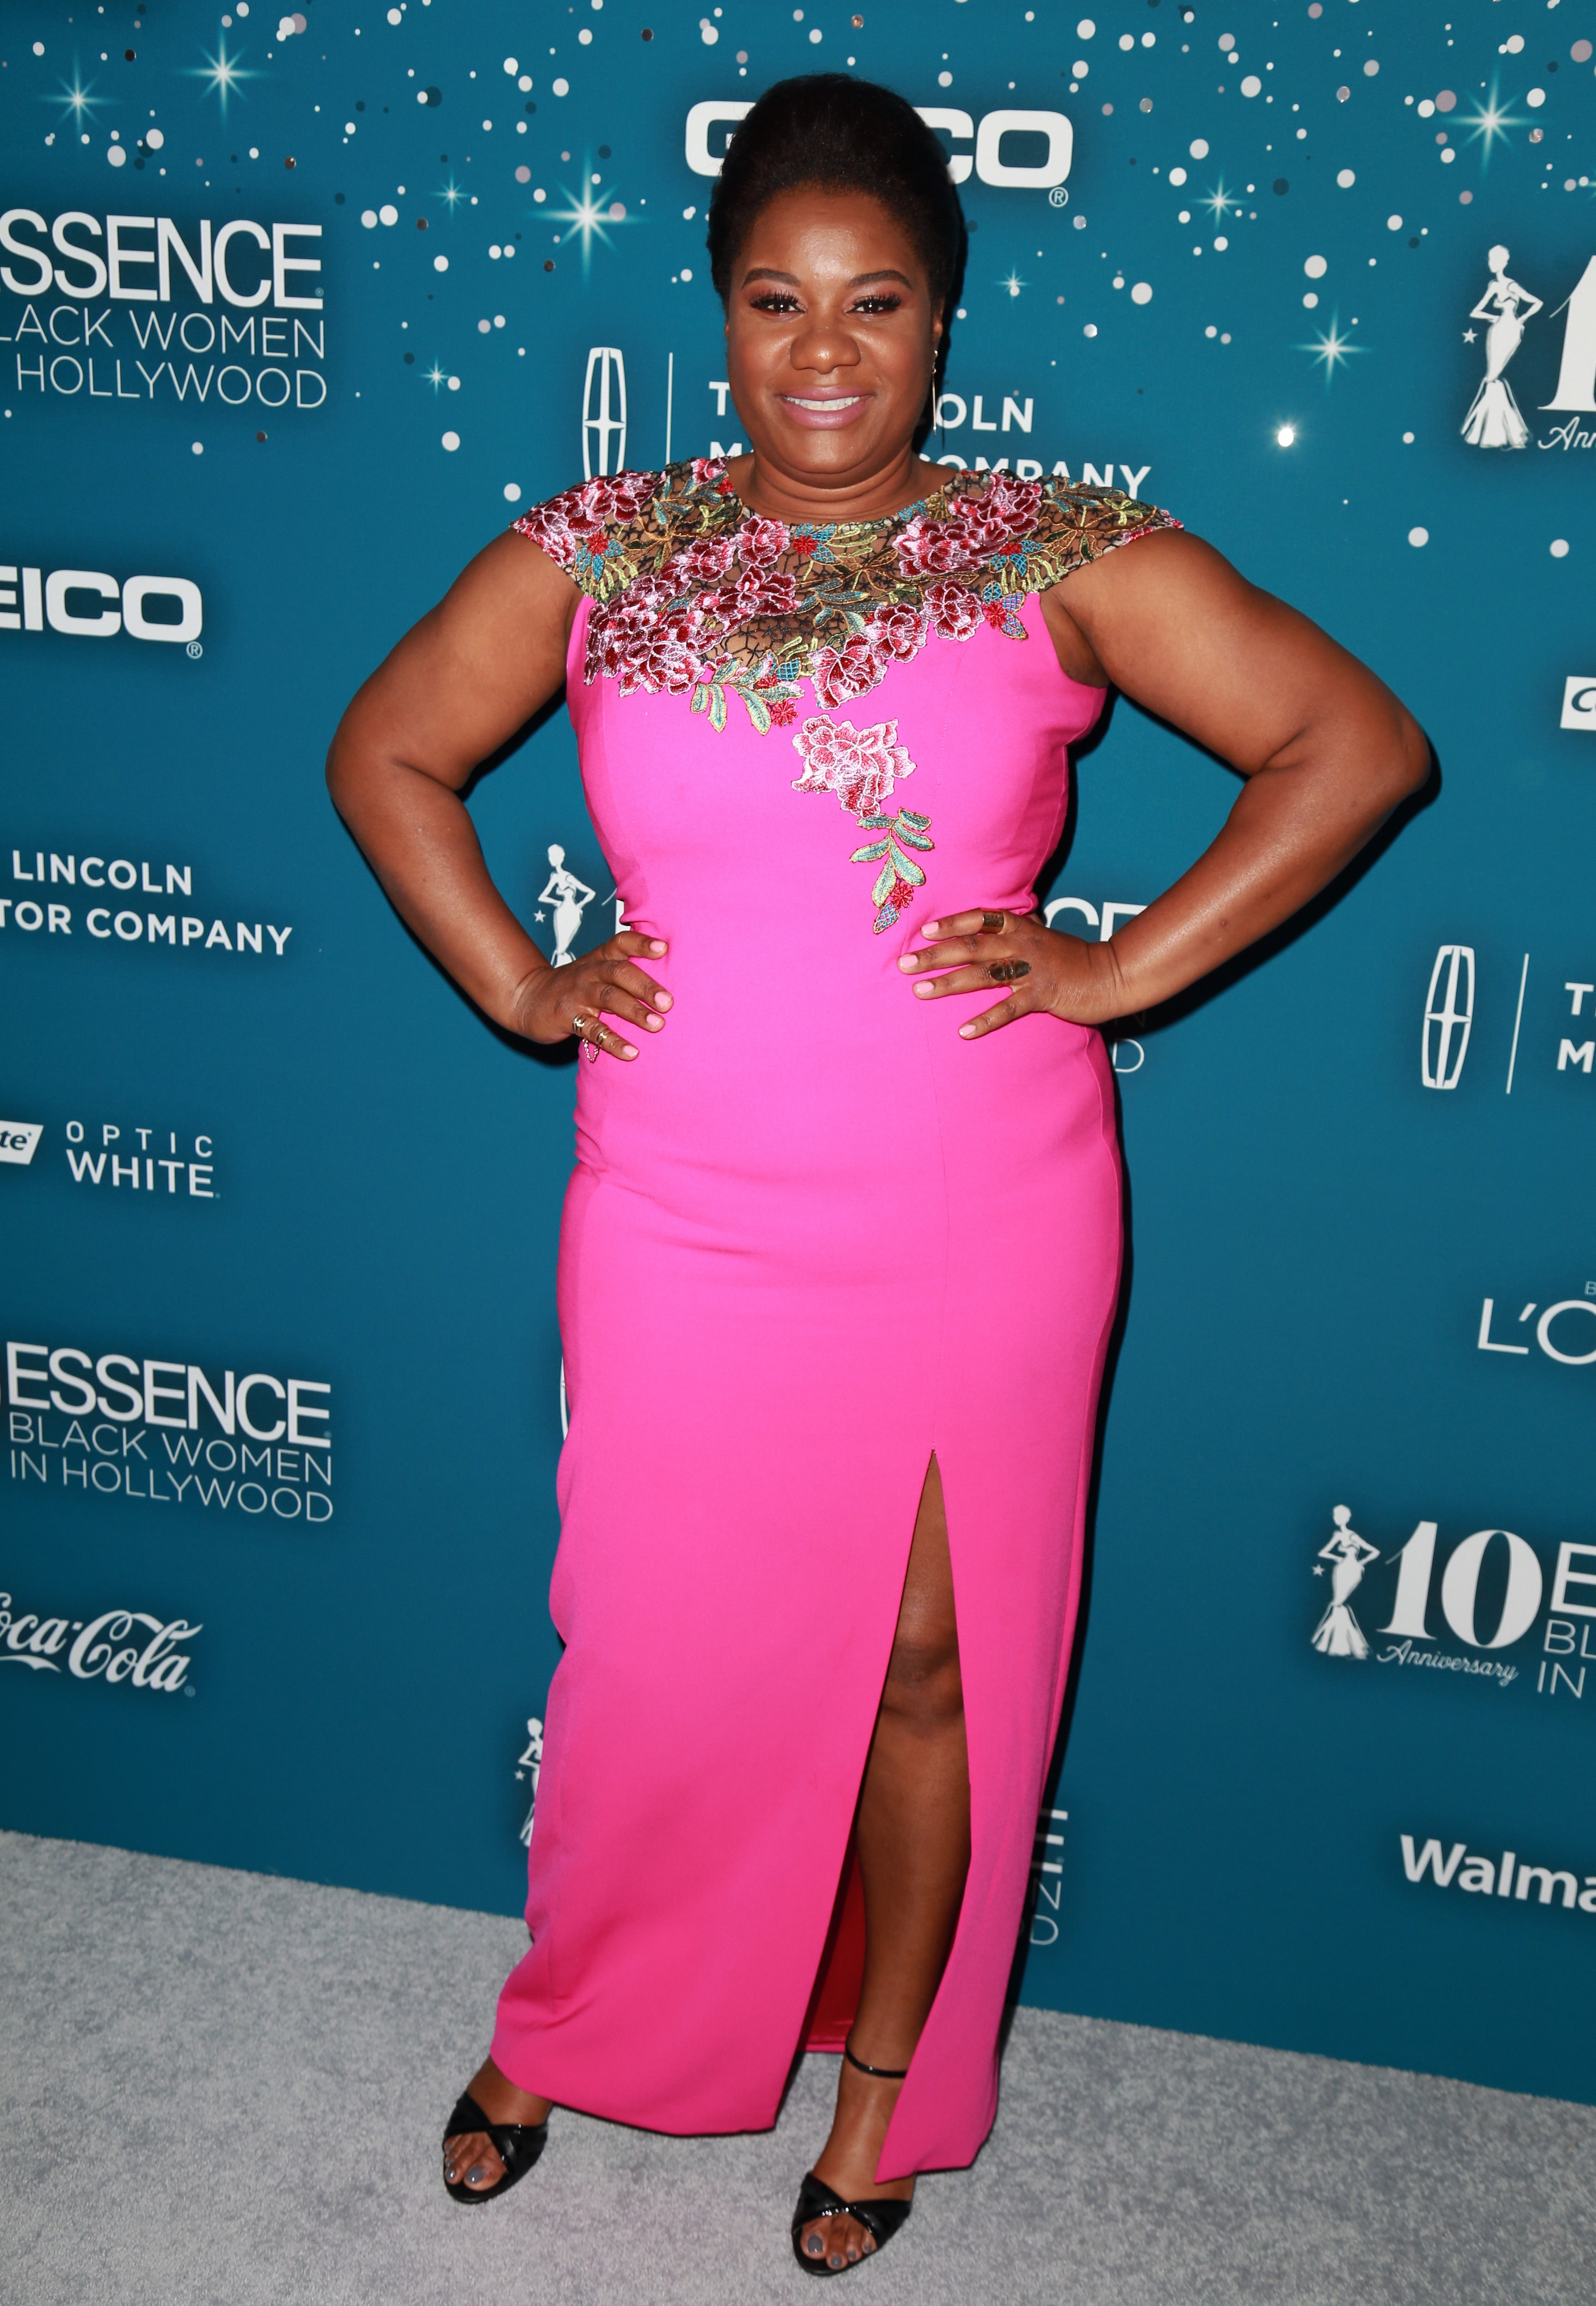 The 10th Annual Black Women in Hollywood Red Carpet Was Beyond Fabulous
